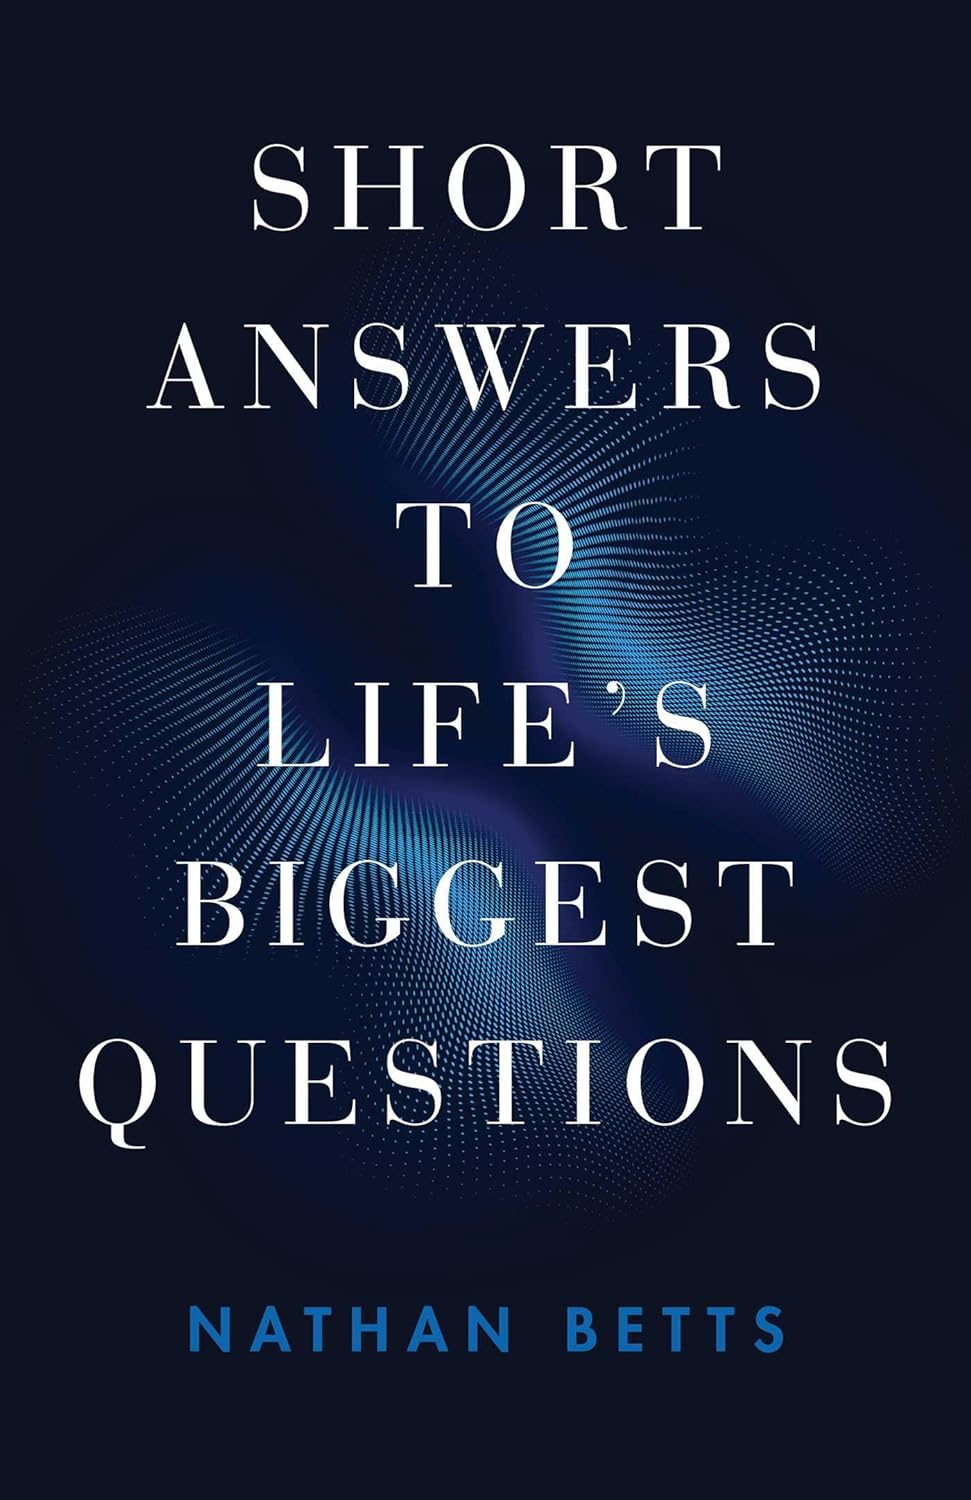 Short Answers To Life's Biggest Questions - Upcoming book by Nathan Betts